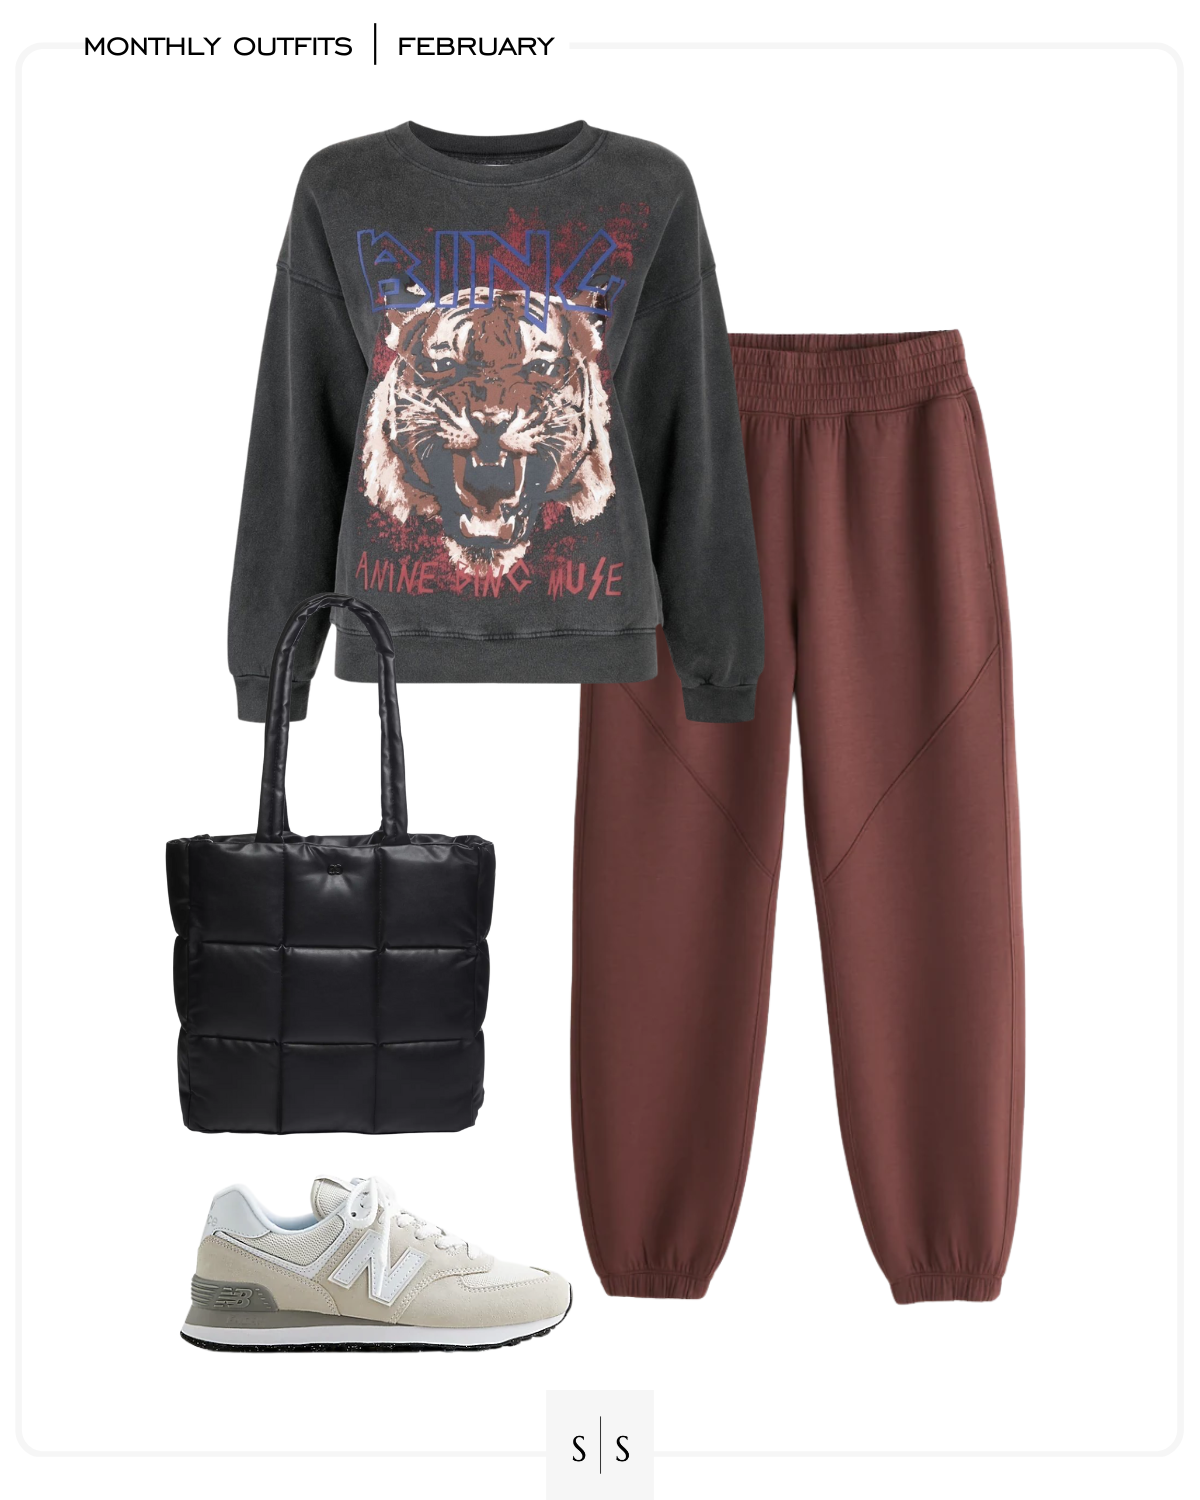 Loungewear athleisure outfit graphic sweatshirt jogger pant